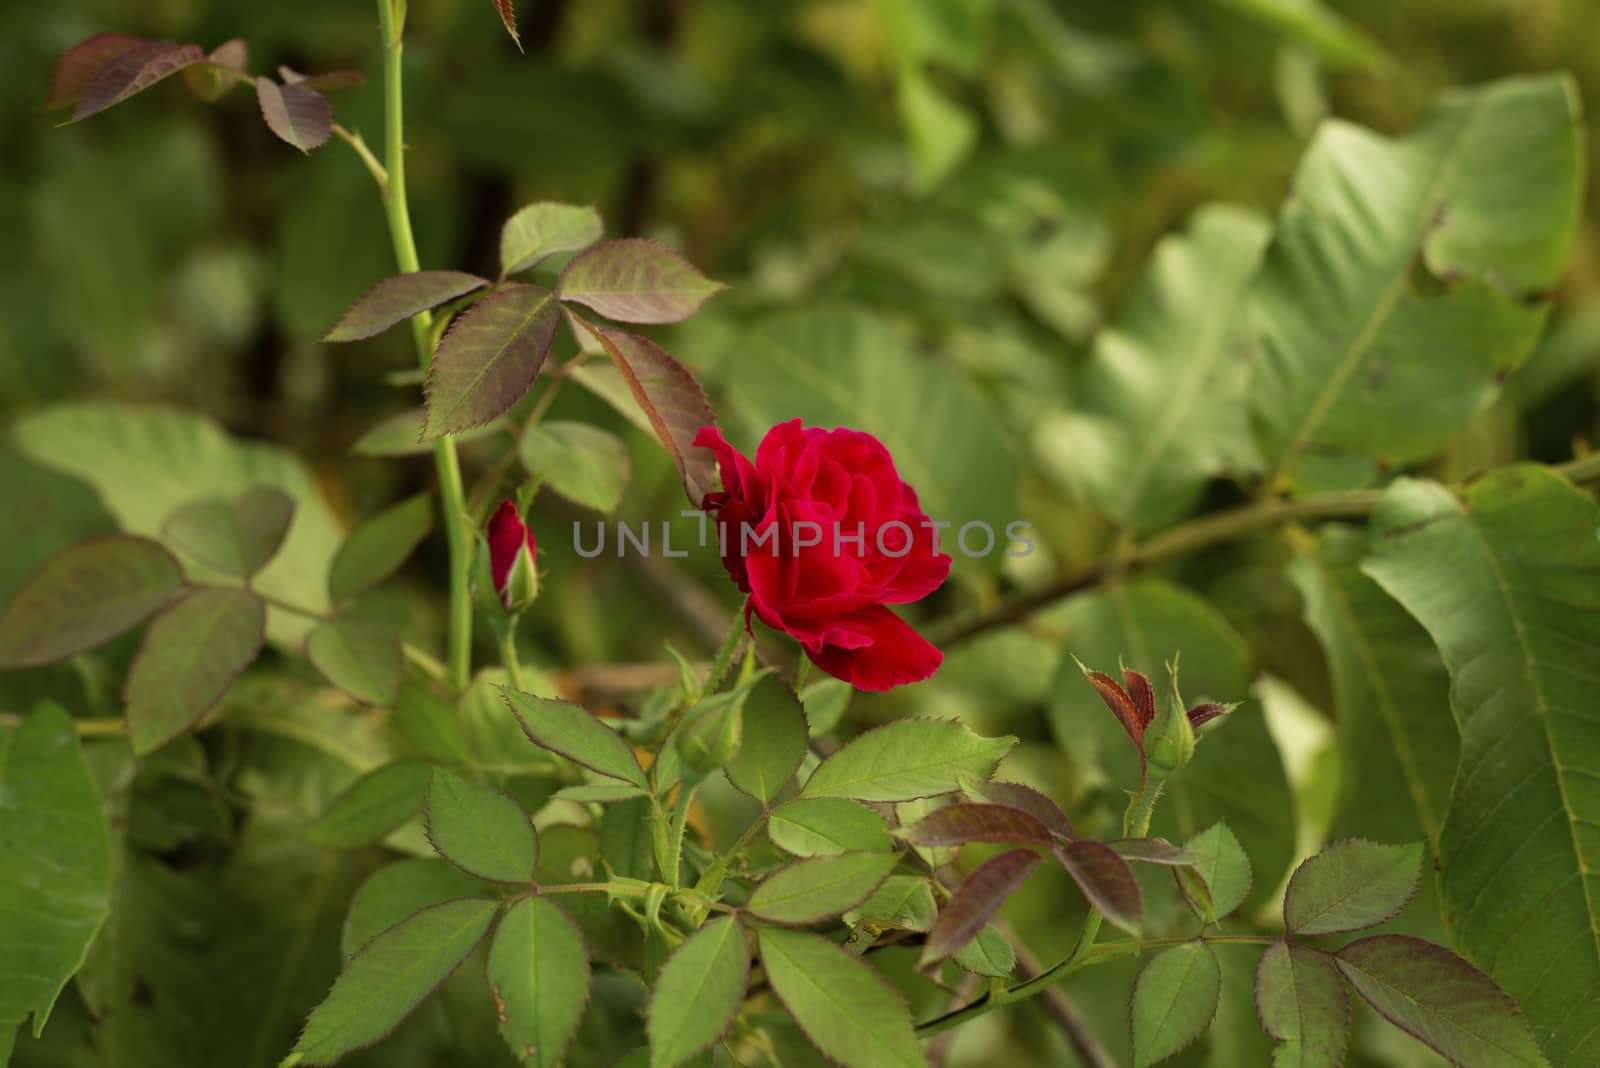 Colorful, beautiful, delicate red rose in the garden, Beautiful red roses garden by shaadjutt36